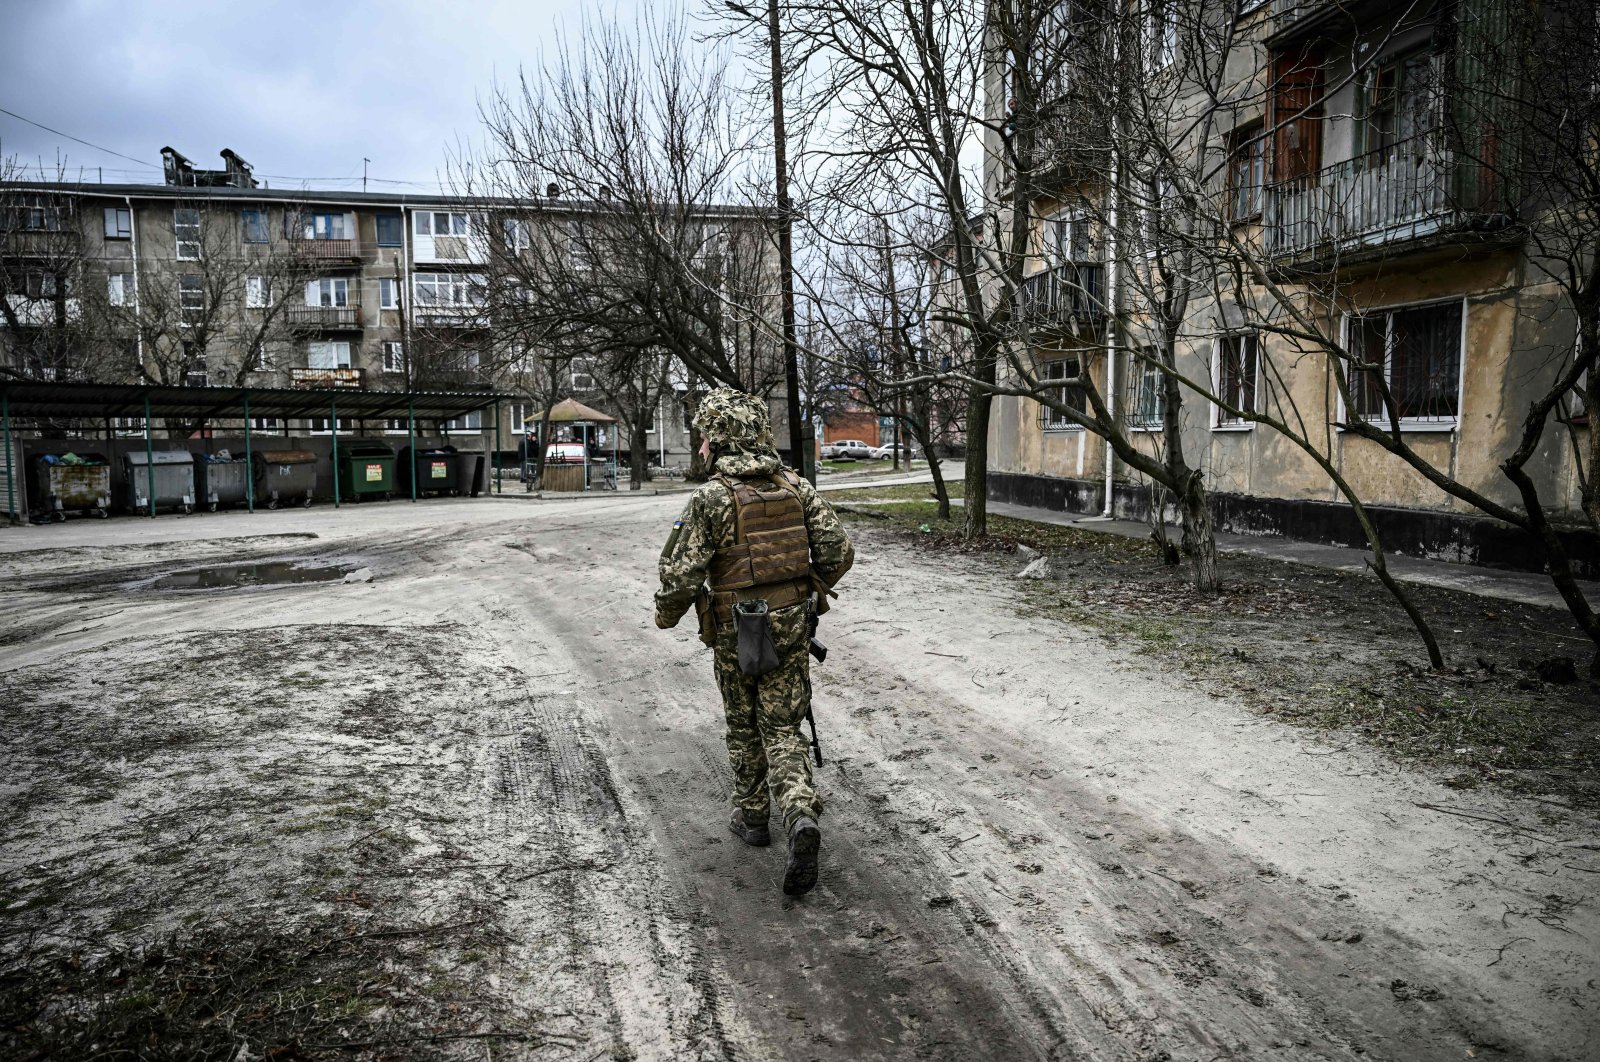 A Ukraine army soldier walks in the town of Schastia, near the eastern Ukraine city of Lugansk, on Feb. 22, 2022, a day after Russia recognized east Ukraine&#039;s separatist republics and ordered the Russian army to send troops there as peacekeepers. (AFP Photo)